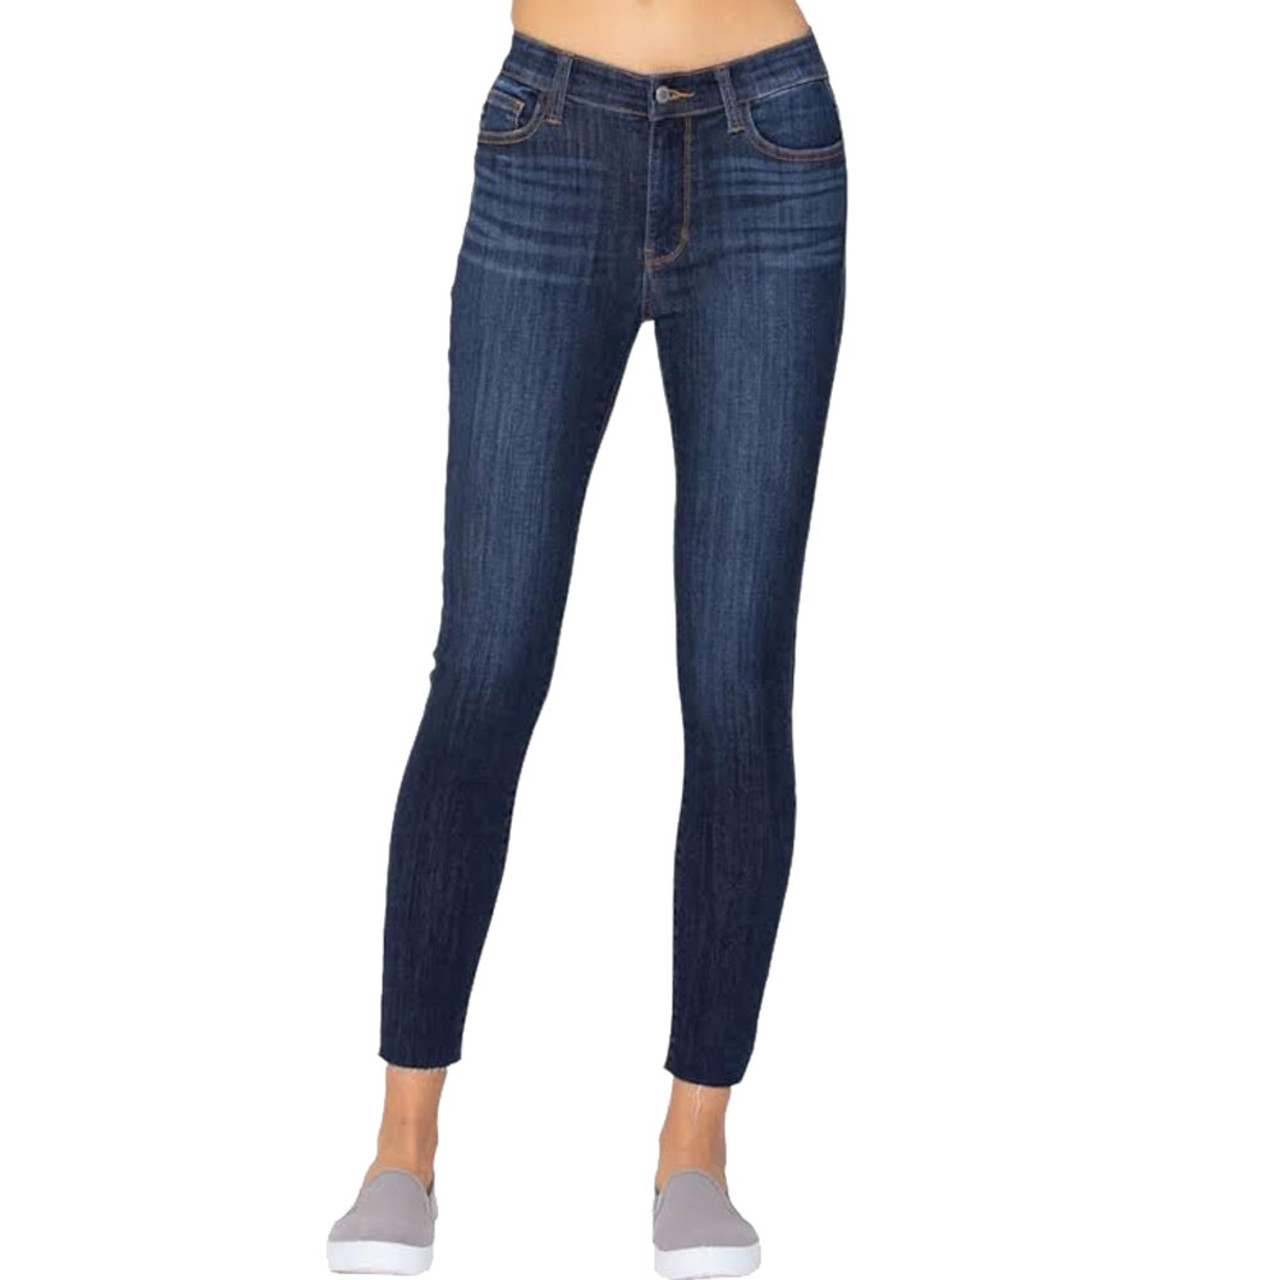 JUDY BLUE MID RISE SKINNY FIT JEANS